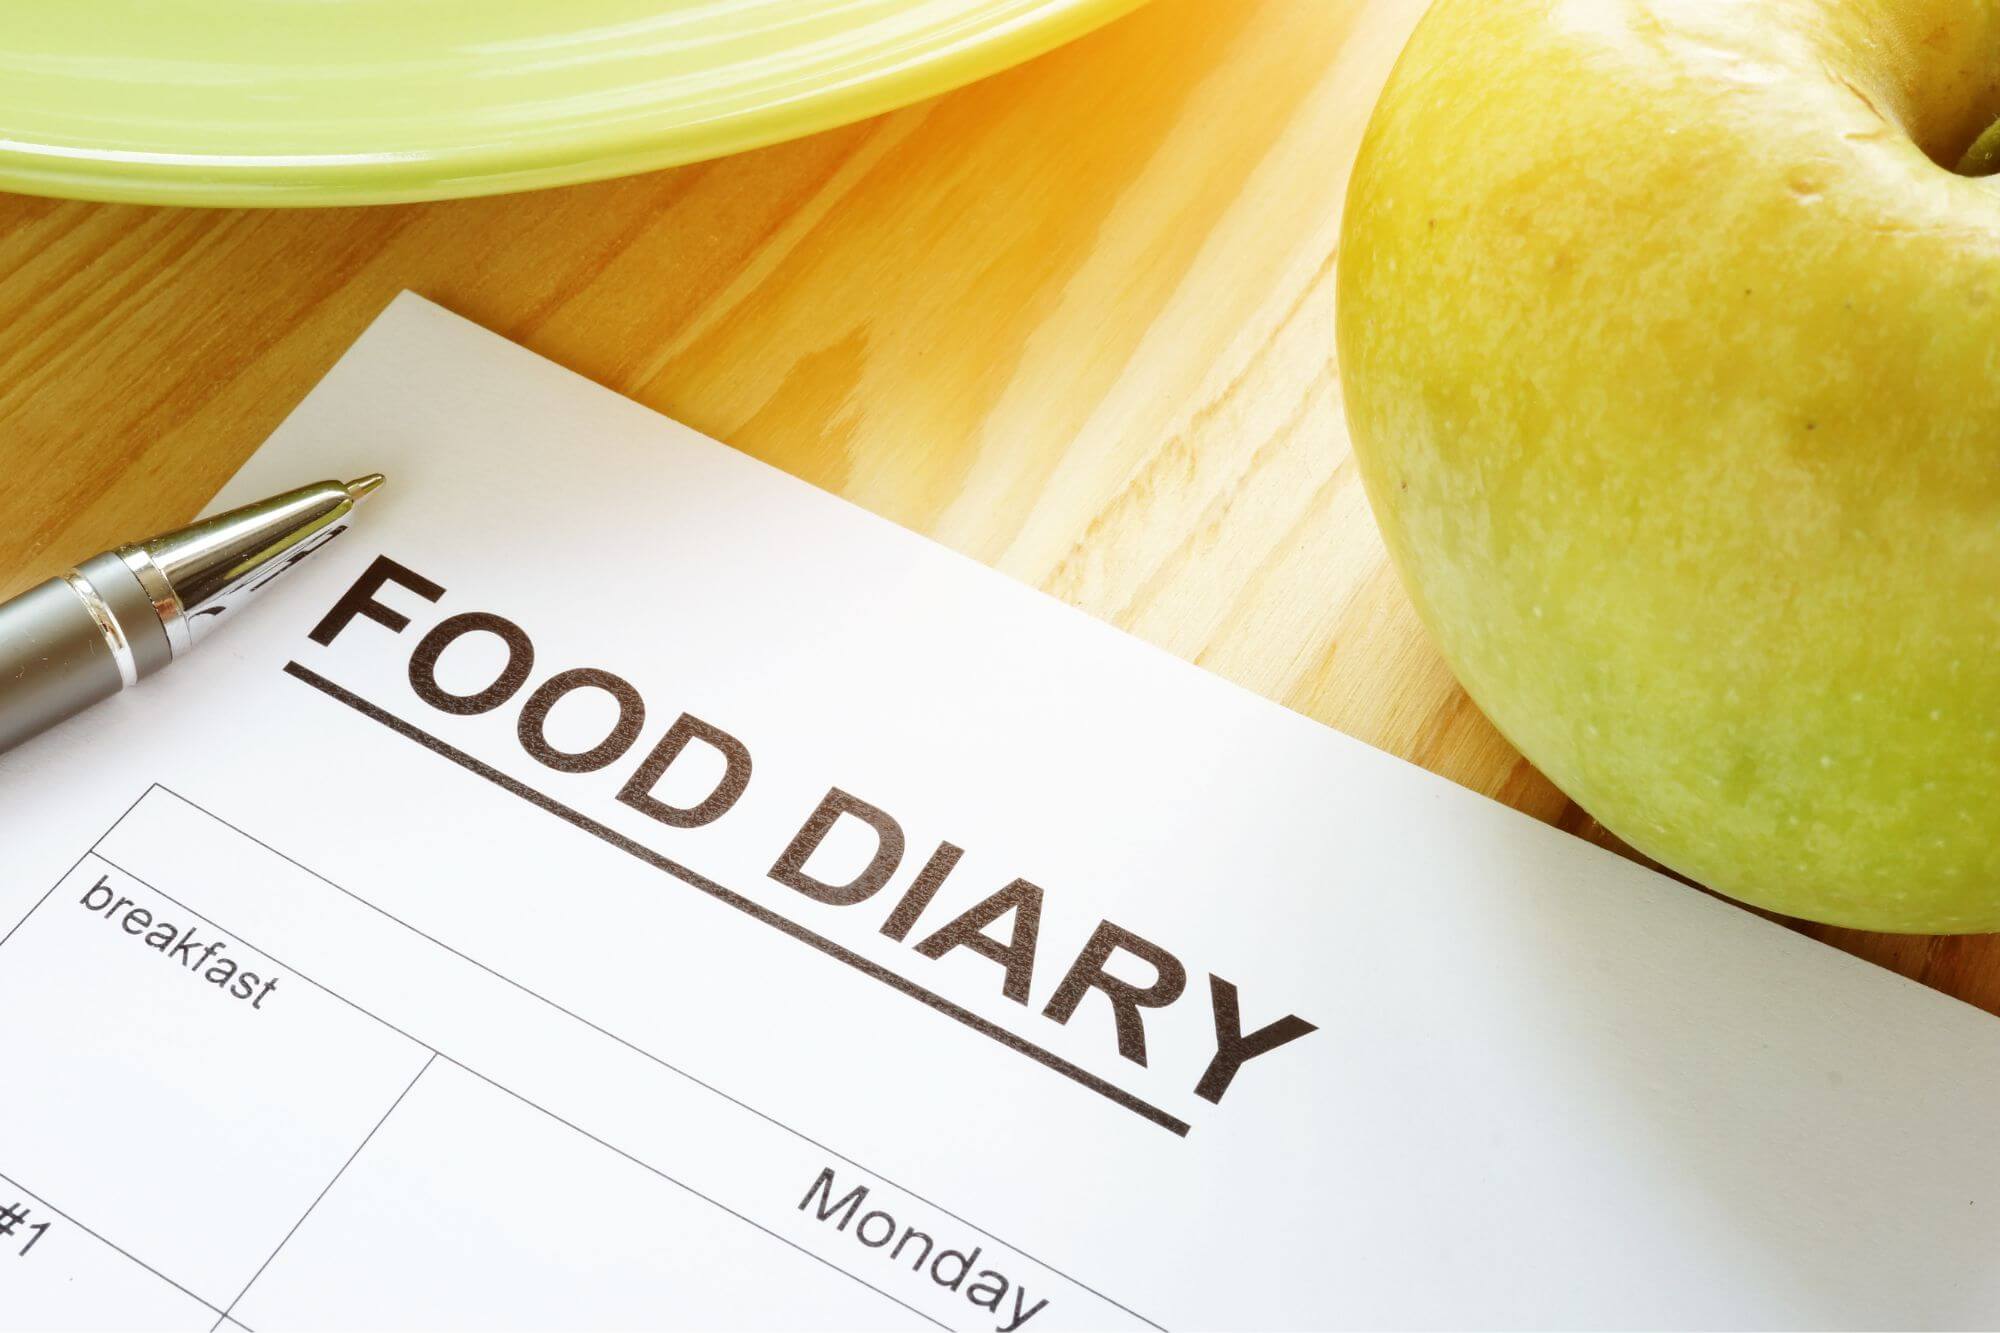 Photo of a food diary and pen next to a healthy apple